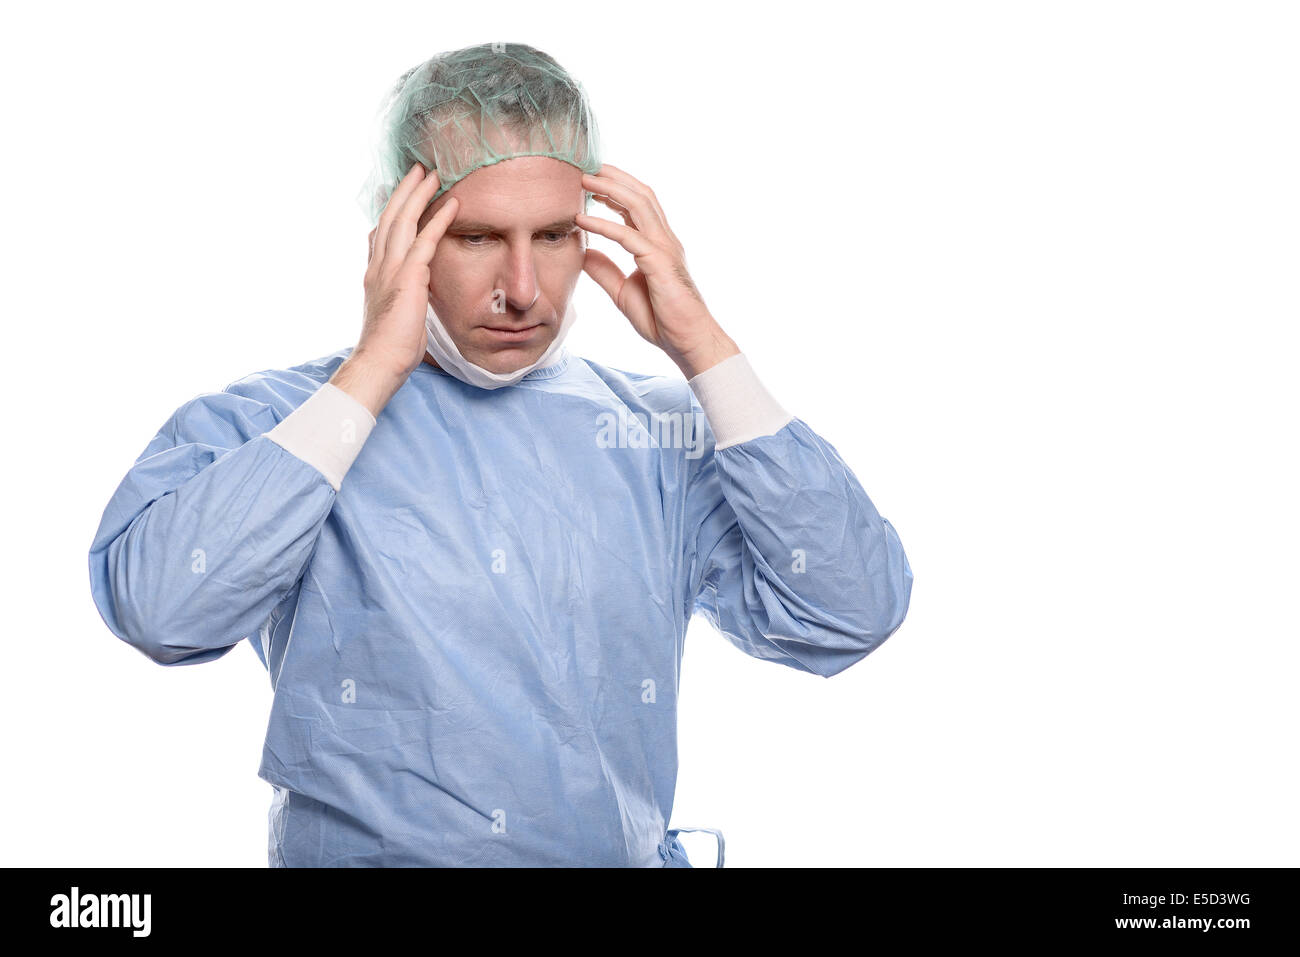 Male doctor suffering from a headache and fatigue holding his temples with his hands and eyes closed as he grimaces in pain Stock Photo